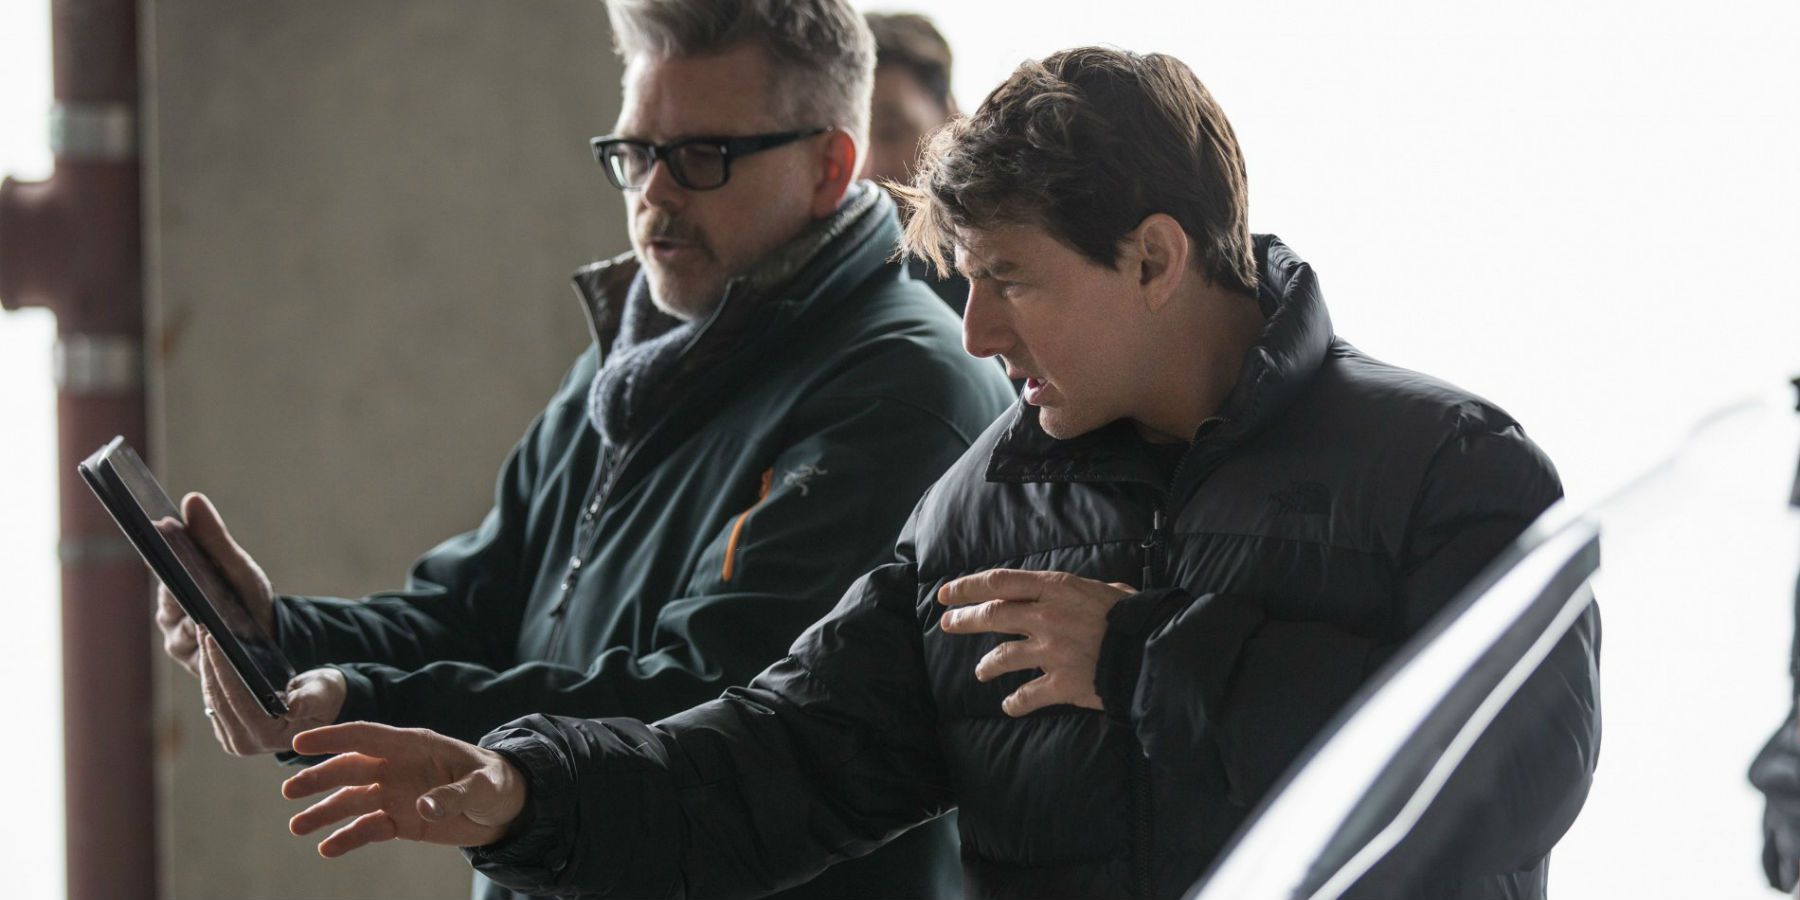 Christopher McQuarrie and Tom Cruise on the set of Mission: Impossible Fallout